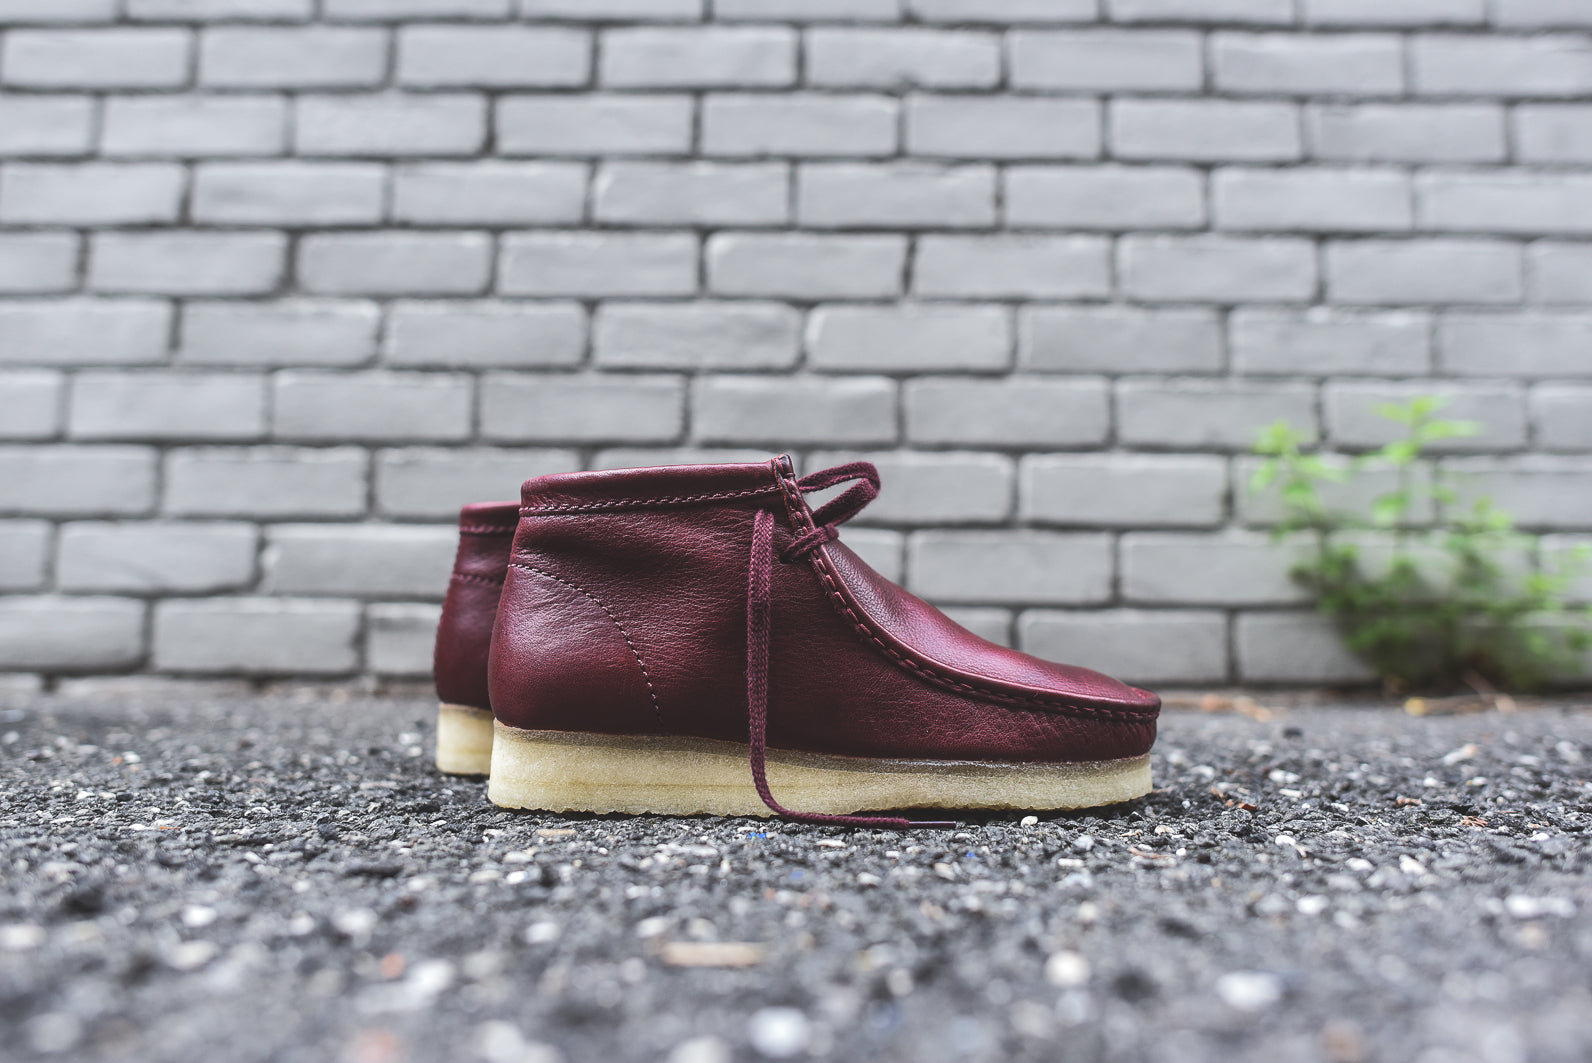 clarks shoes 2015 winter